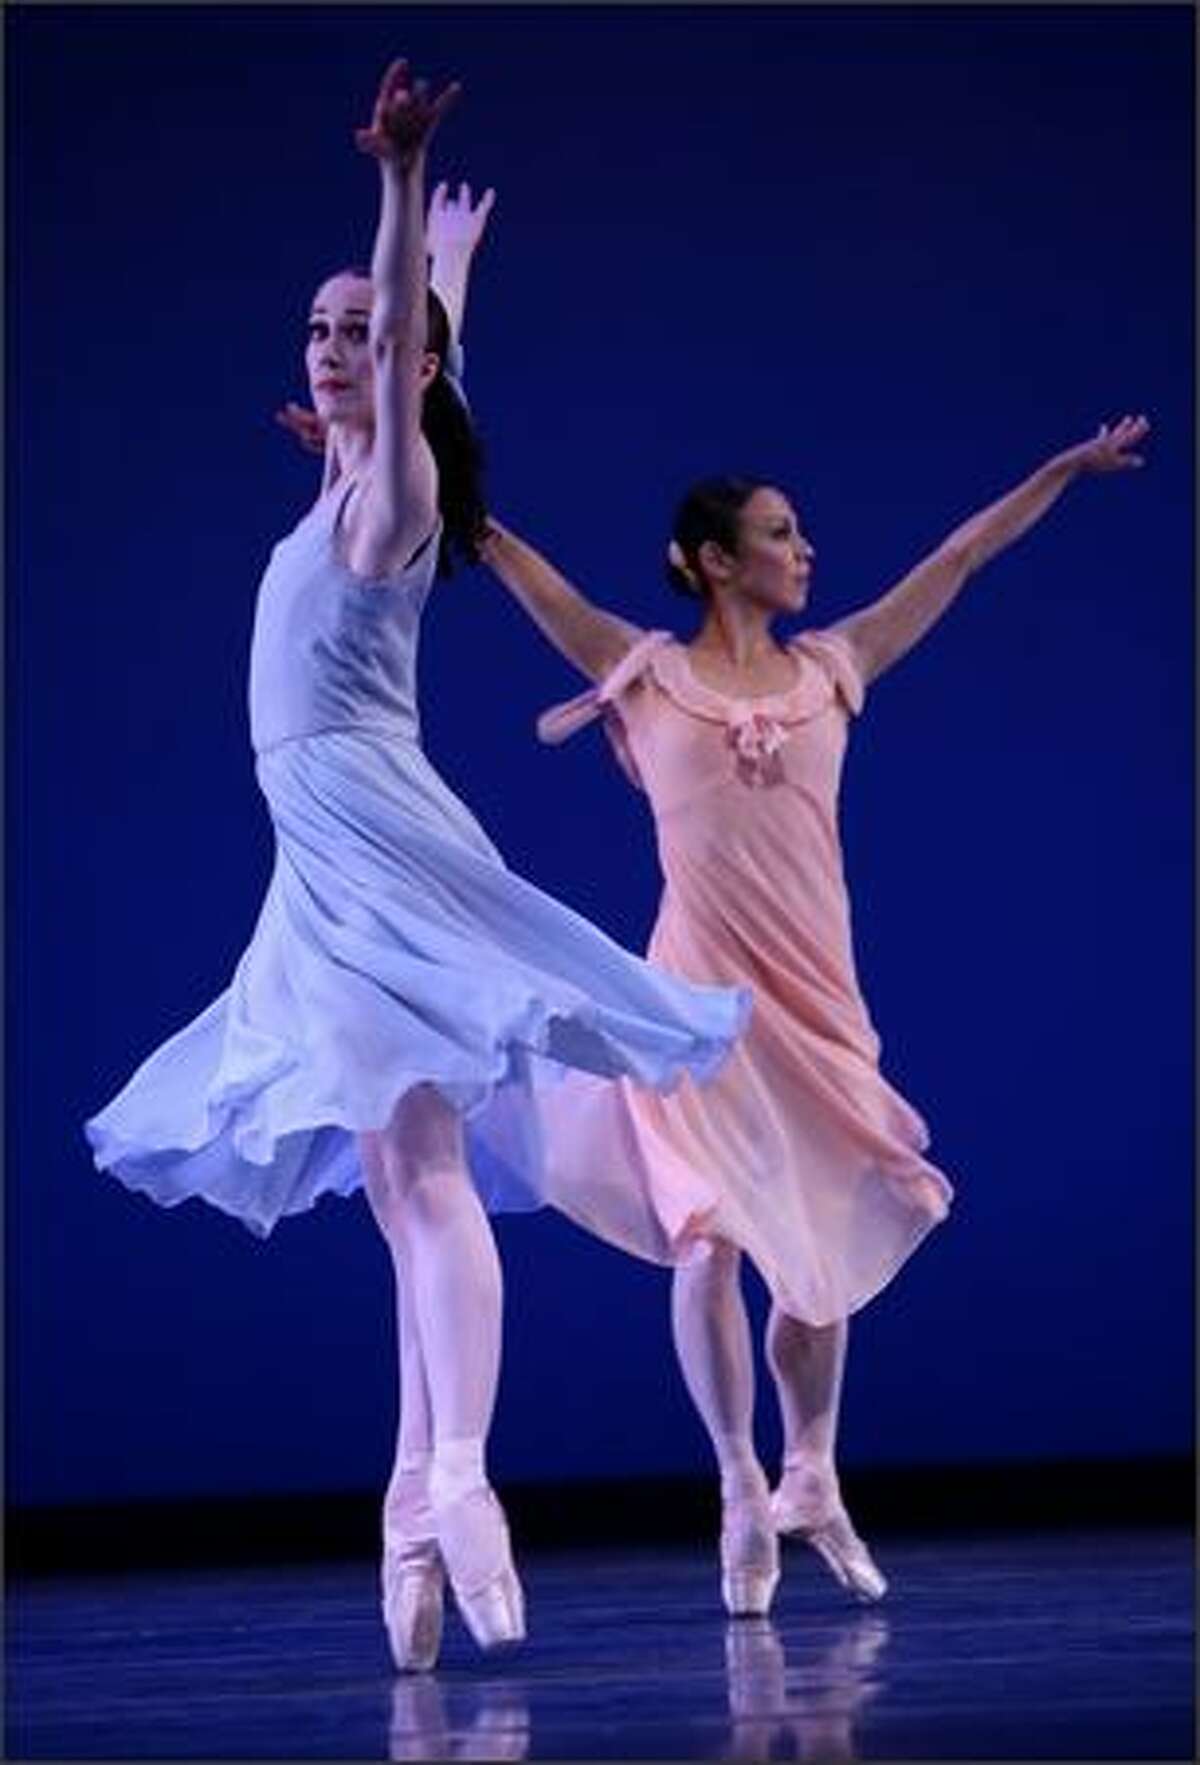 Corps de ballet dancer Sarah Ricard Orza, left, and principal dancer Kaori Nakamura of Pacific Northwest Ballet perform Jerome Robbins' "Dances at a Gathering" during a dress rehearsal for the final program.